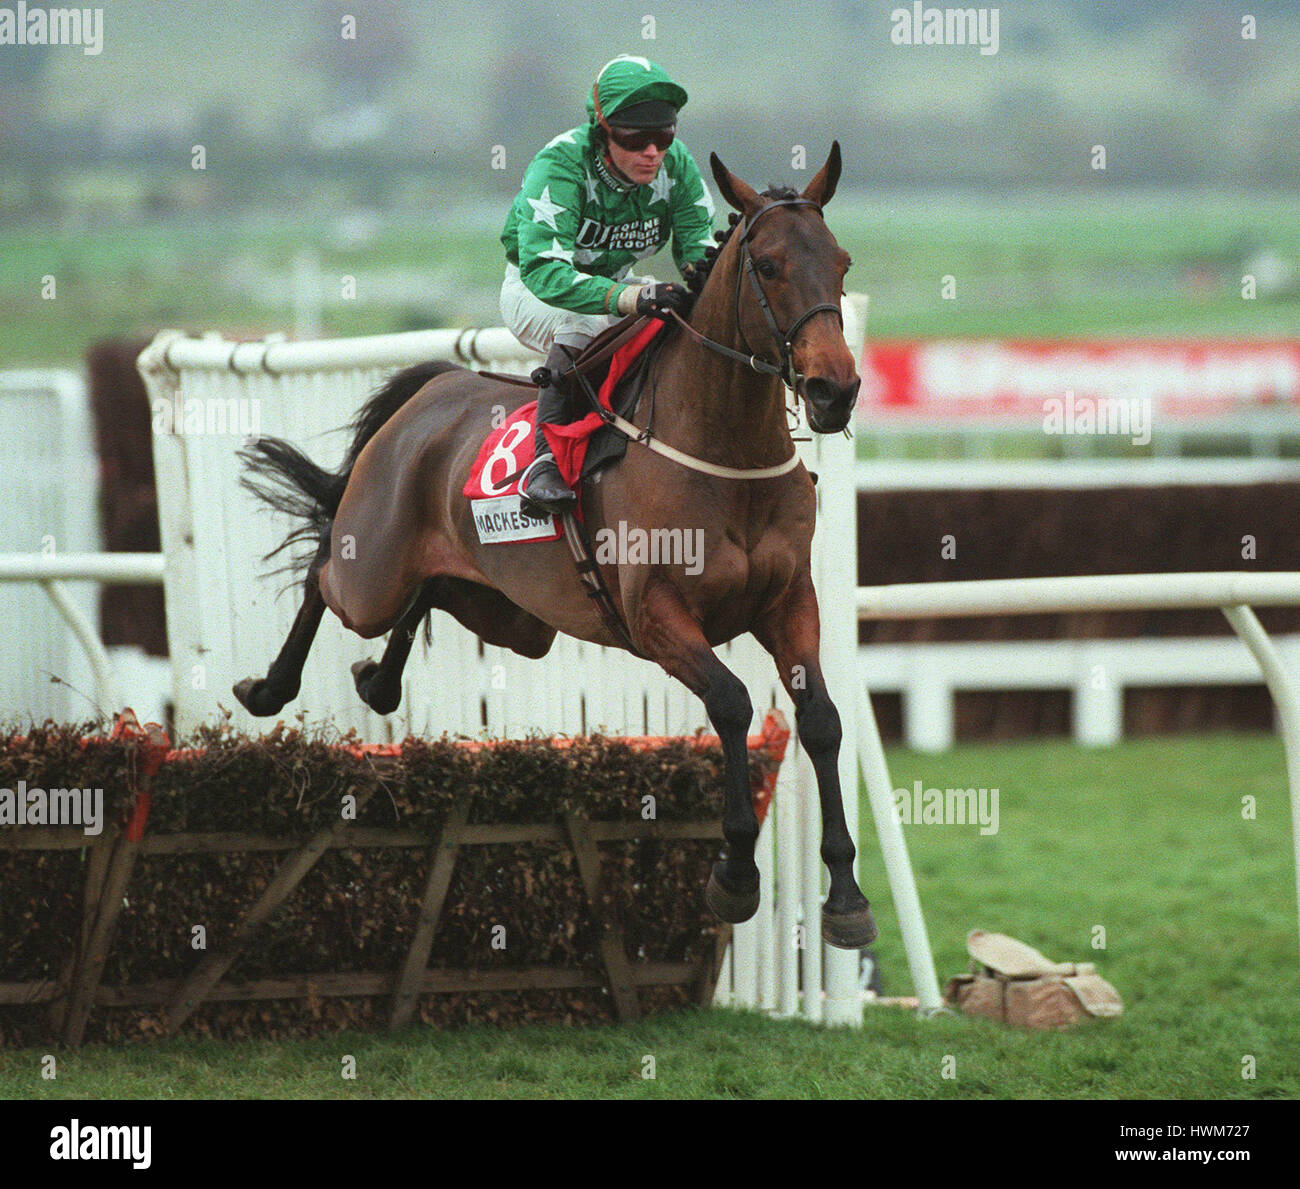 SHORE PARTY RIDDEN BY CARL LLEWELLYN 18 November 1997 Stock Photo